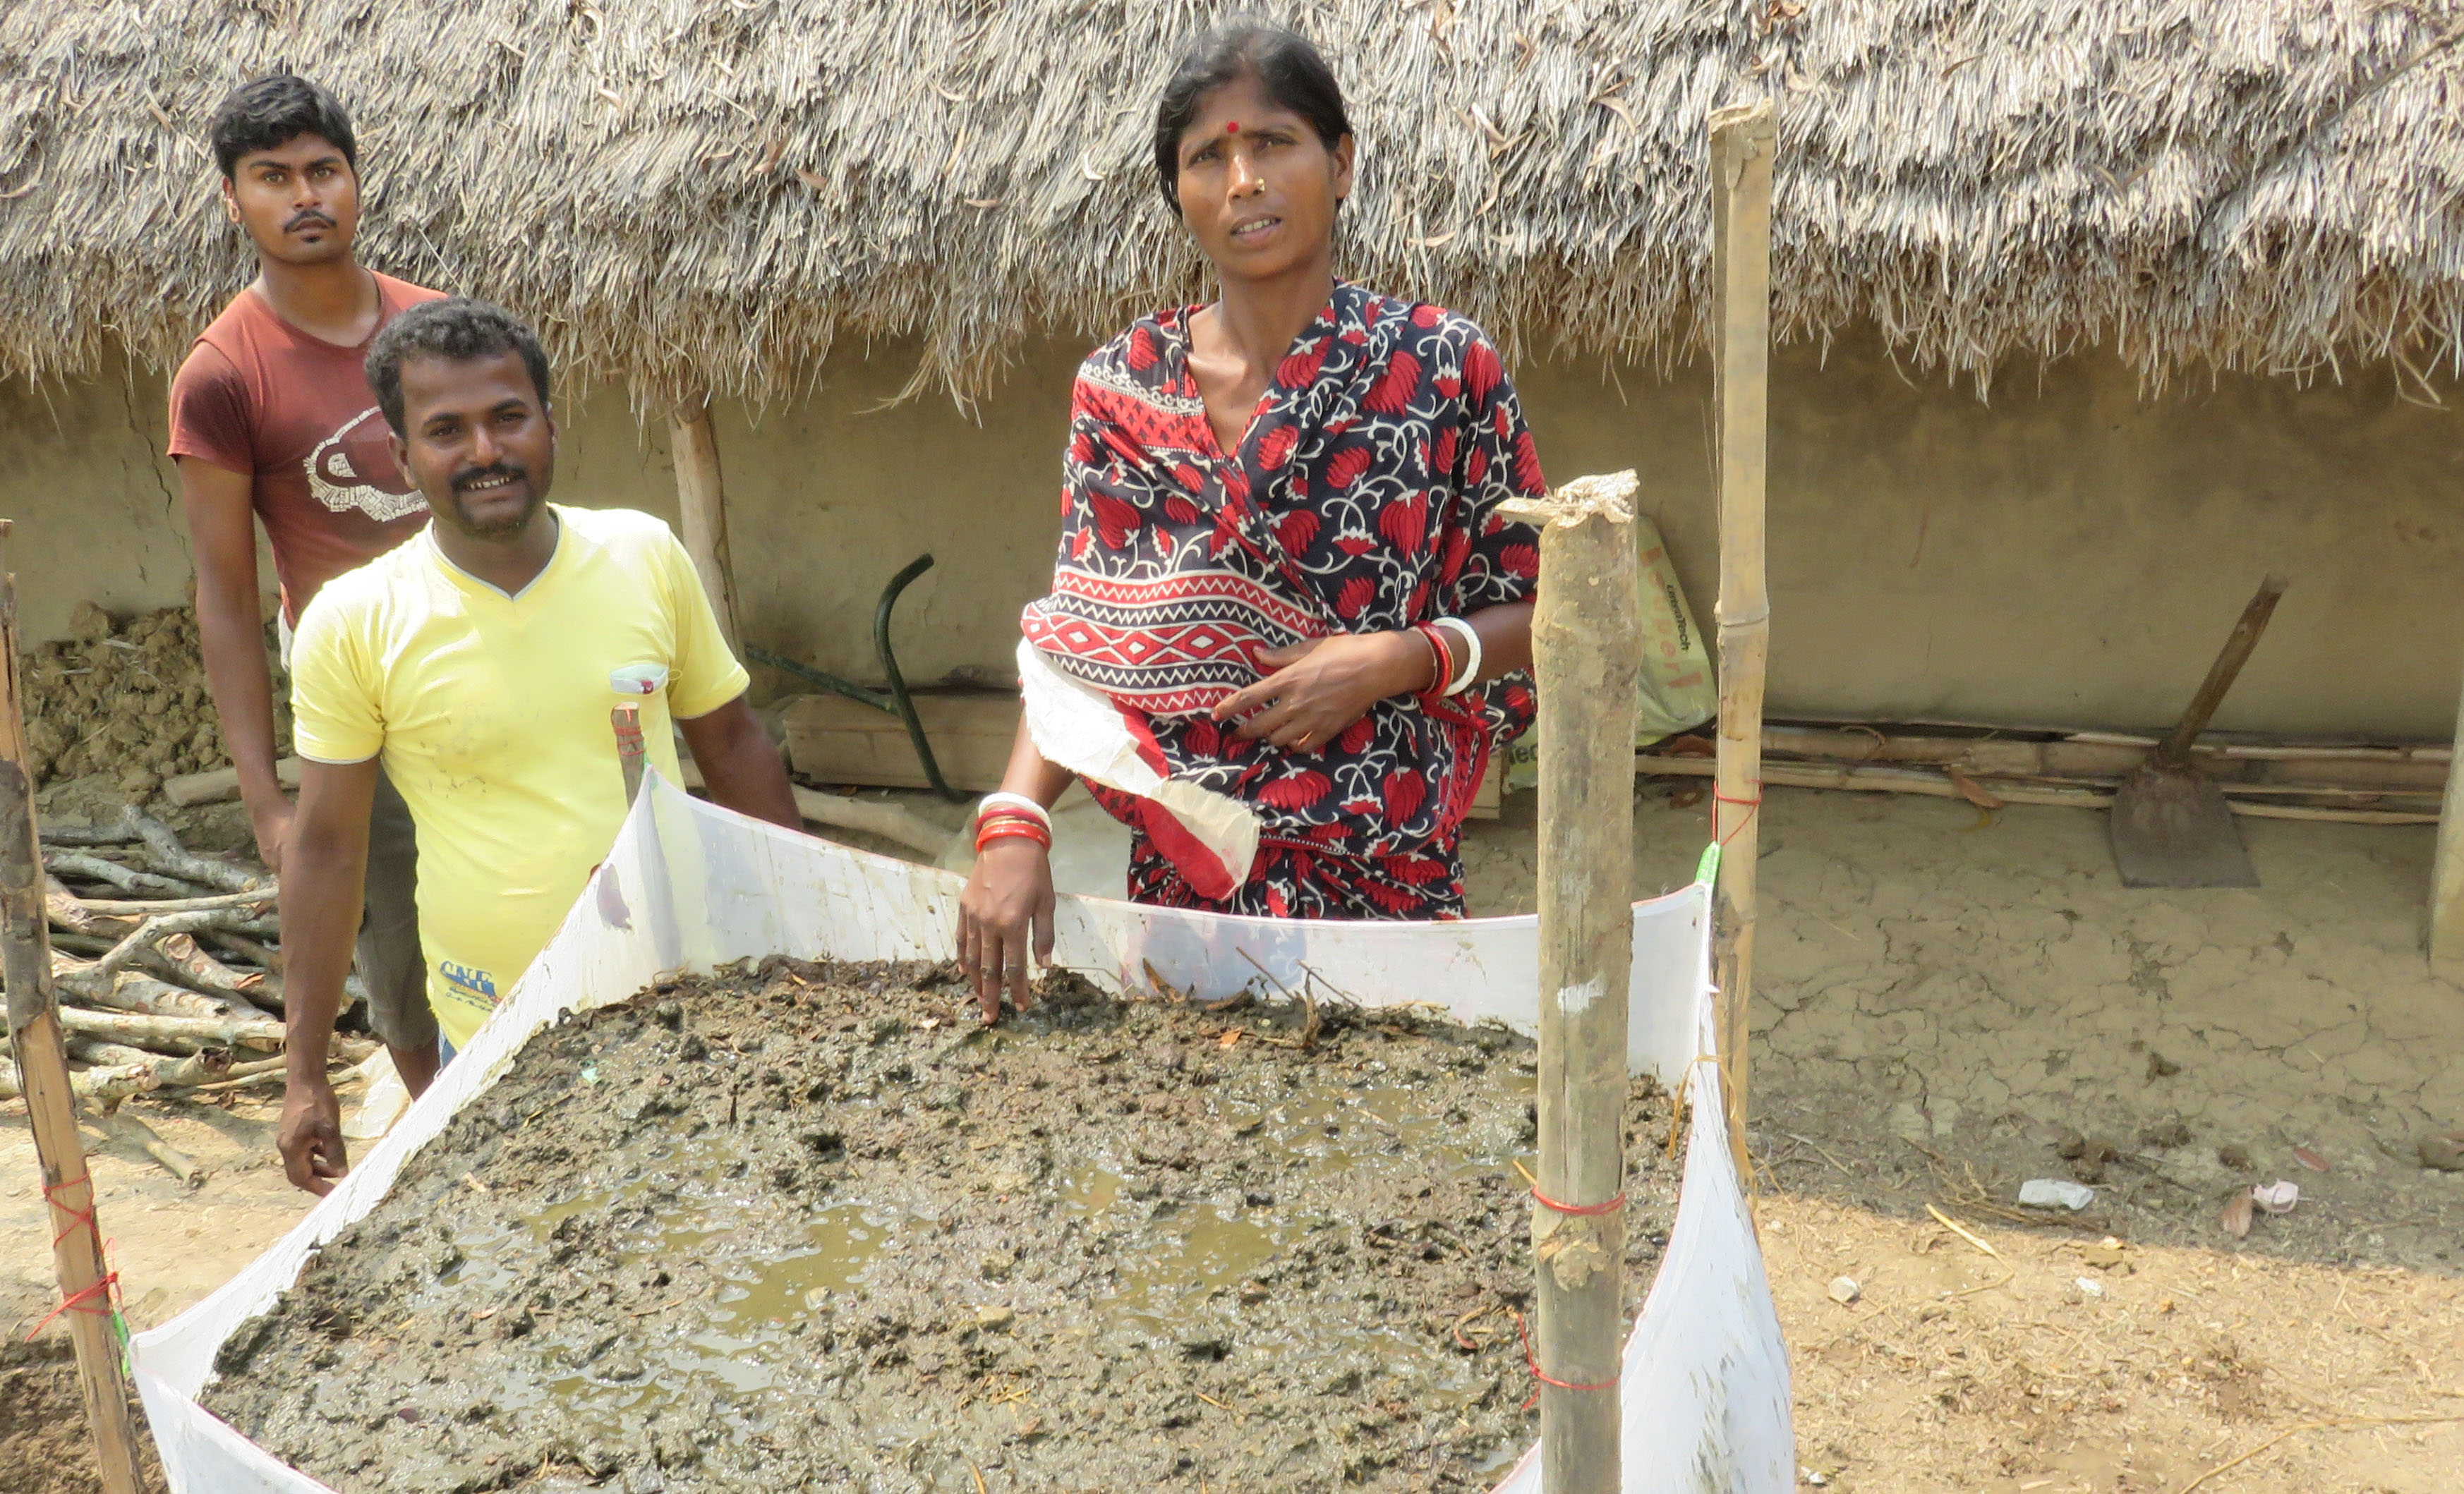 A woman stands next to a large basin full of vermicompost, with two men beside her